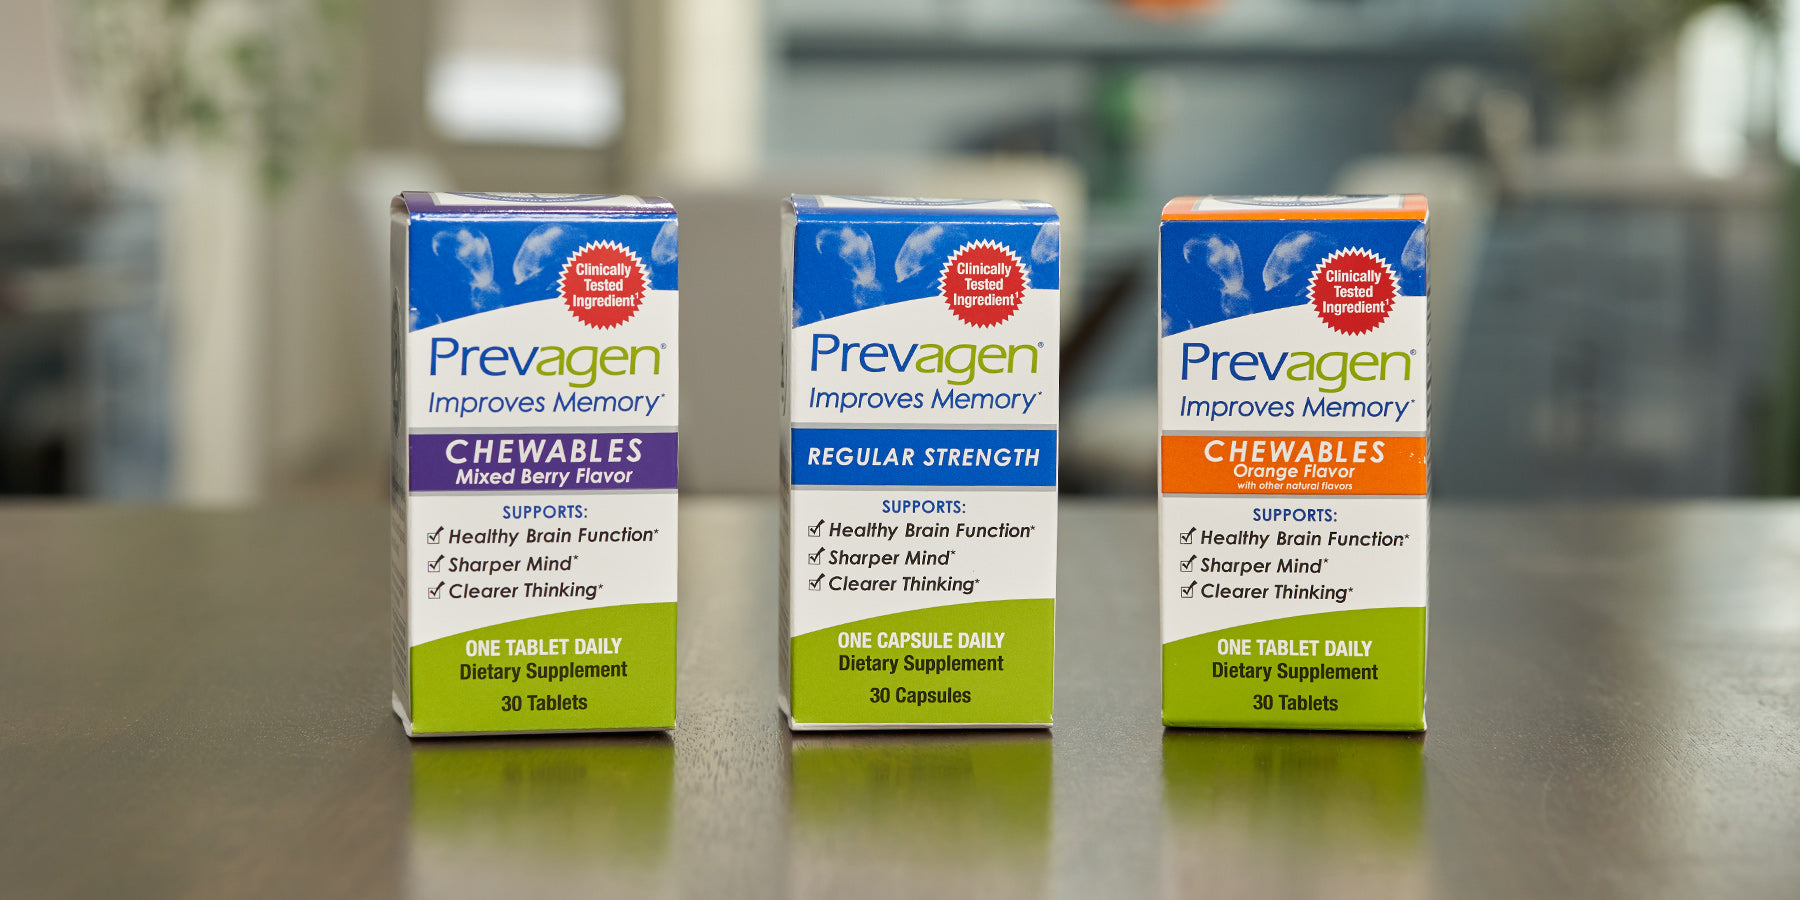 Prevagen bottles of regular strength with mixed berry flavor chewables, regular strength capsules 30 day supply and orange flavor chewables